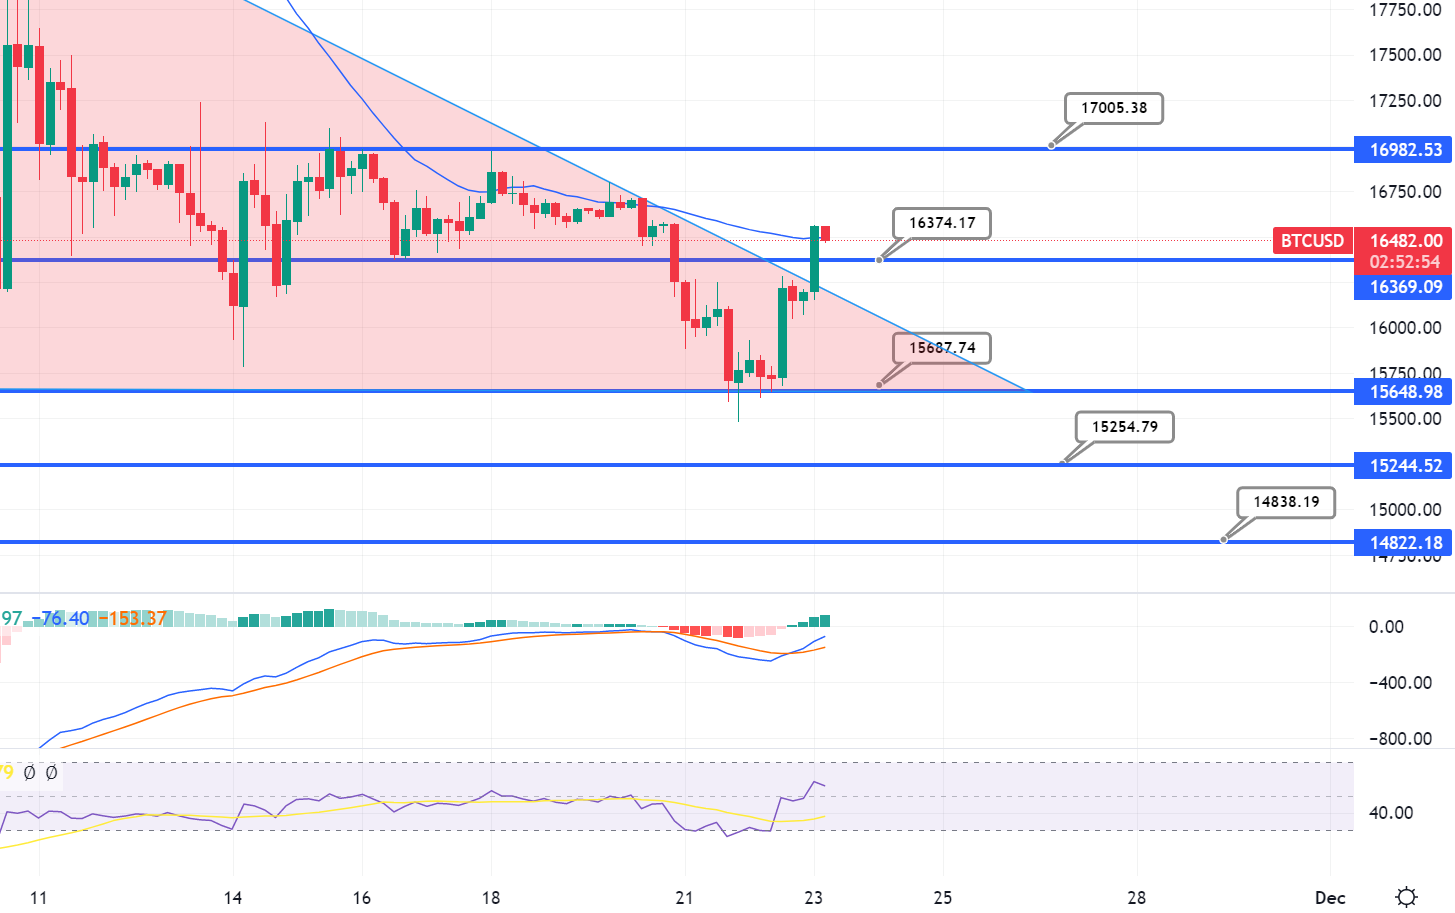 Bitcoin Breaks out of Descending Triangle – Can $17,000 Be Next Target?